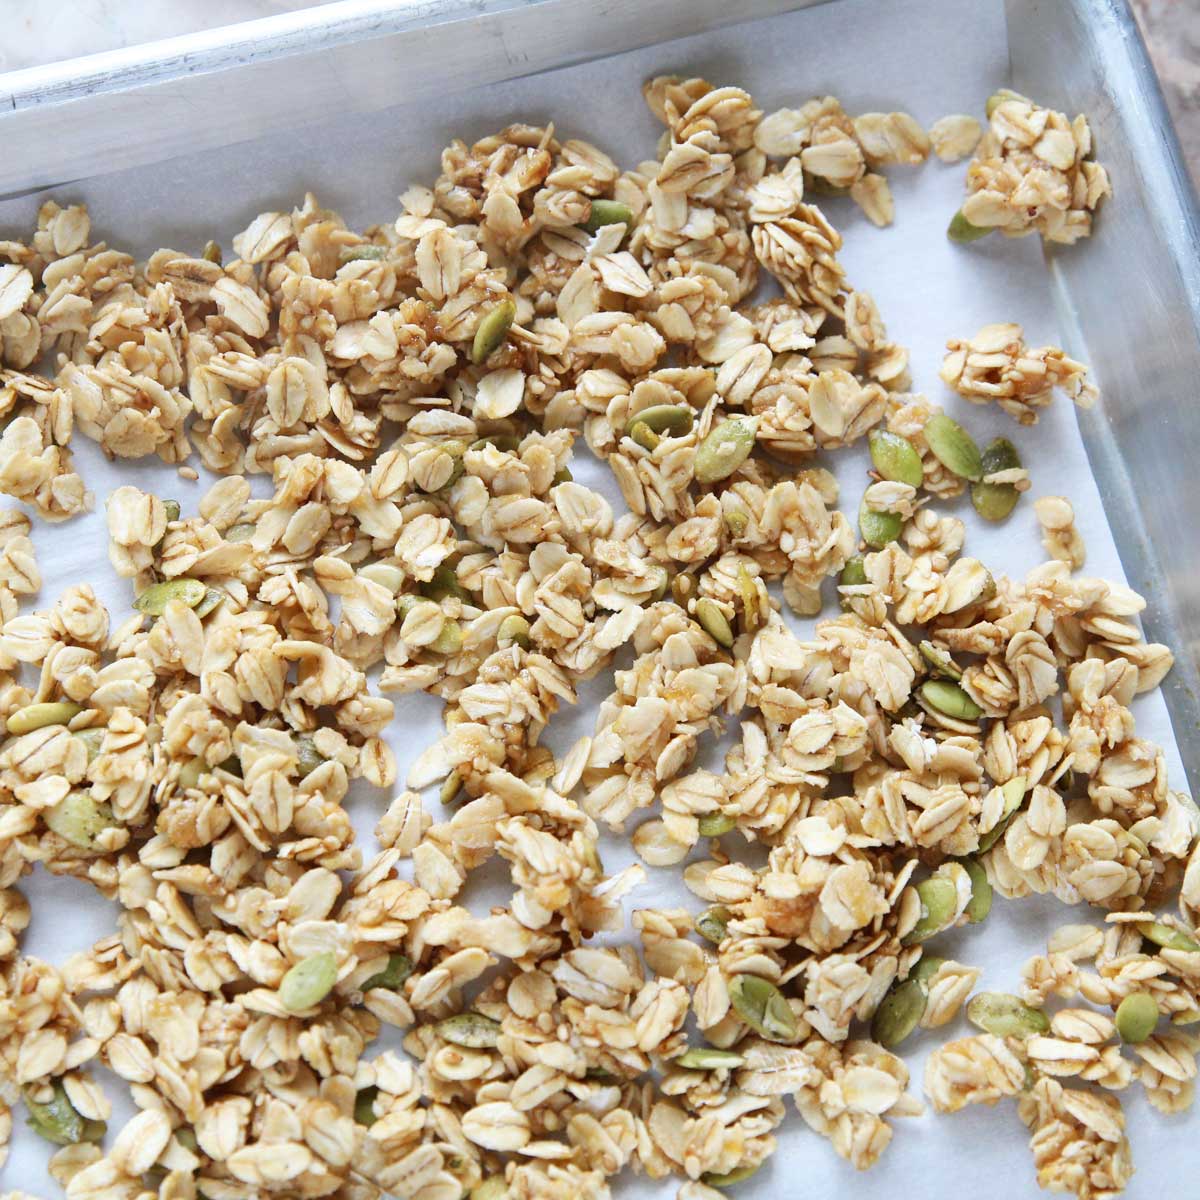 Miso granola baked in an oven